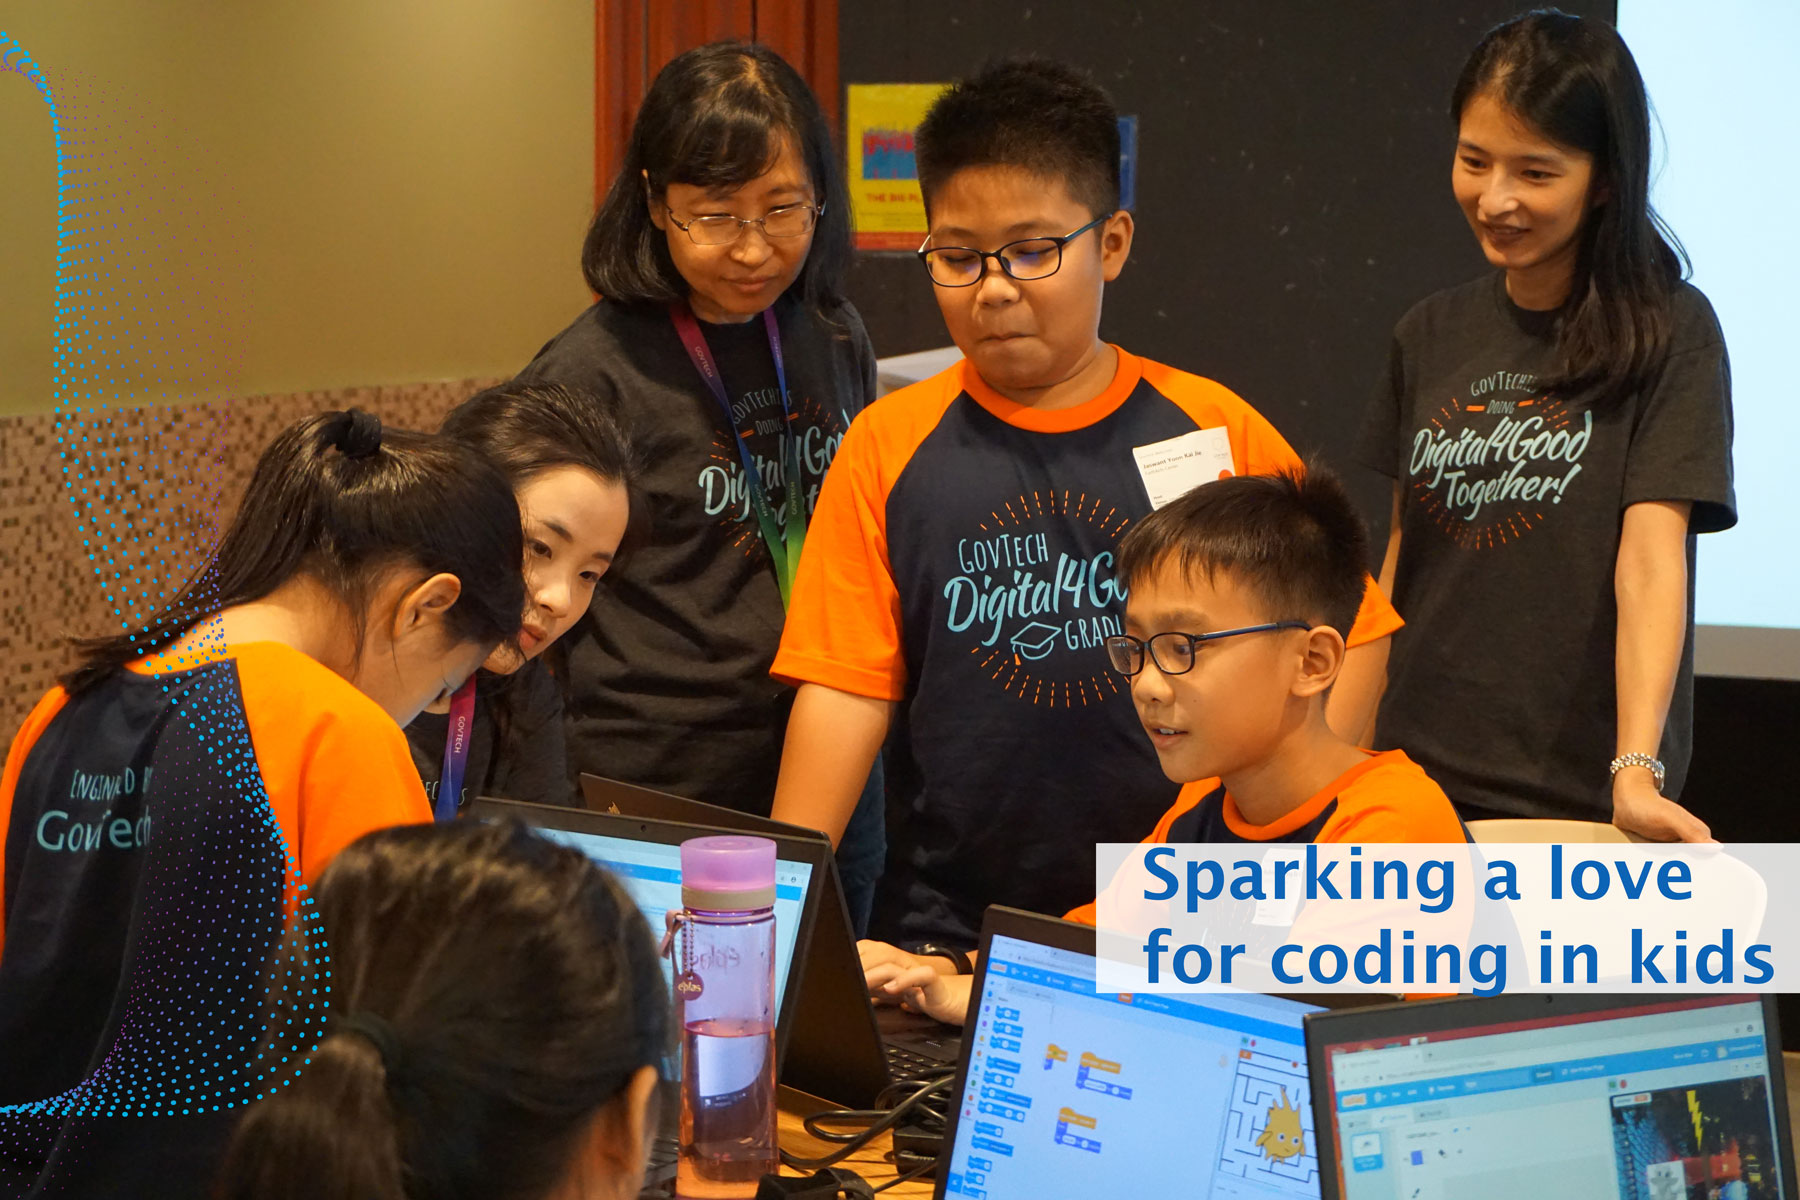 Teaching Scratch coding to kids by GovTech volunteers in a Smart Nation